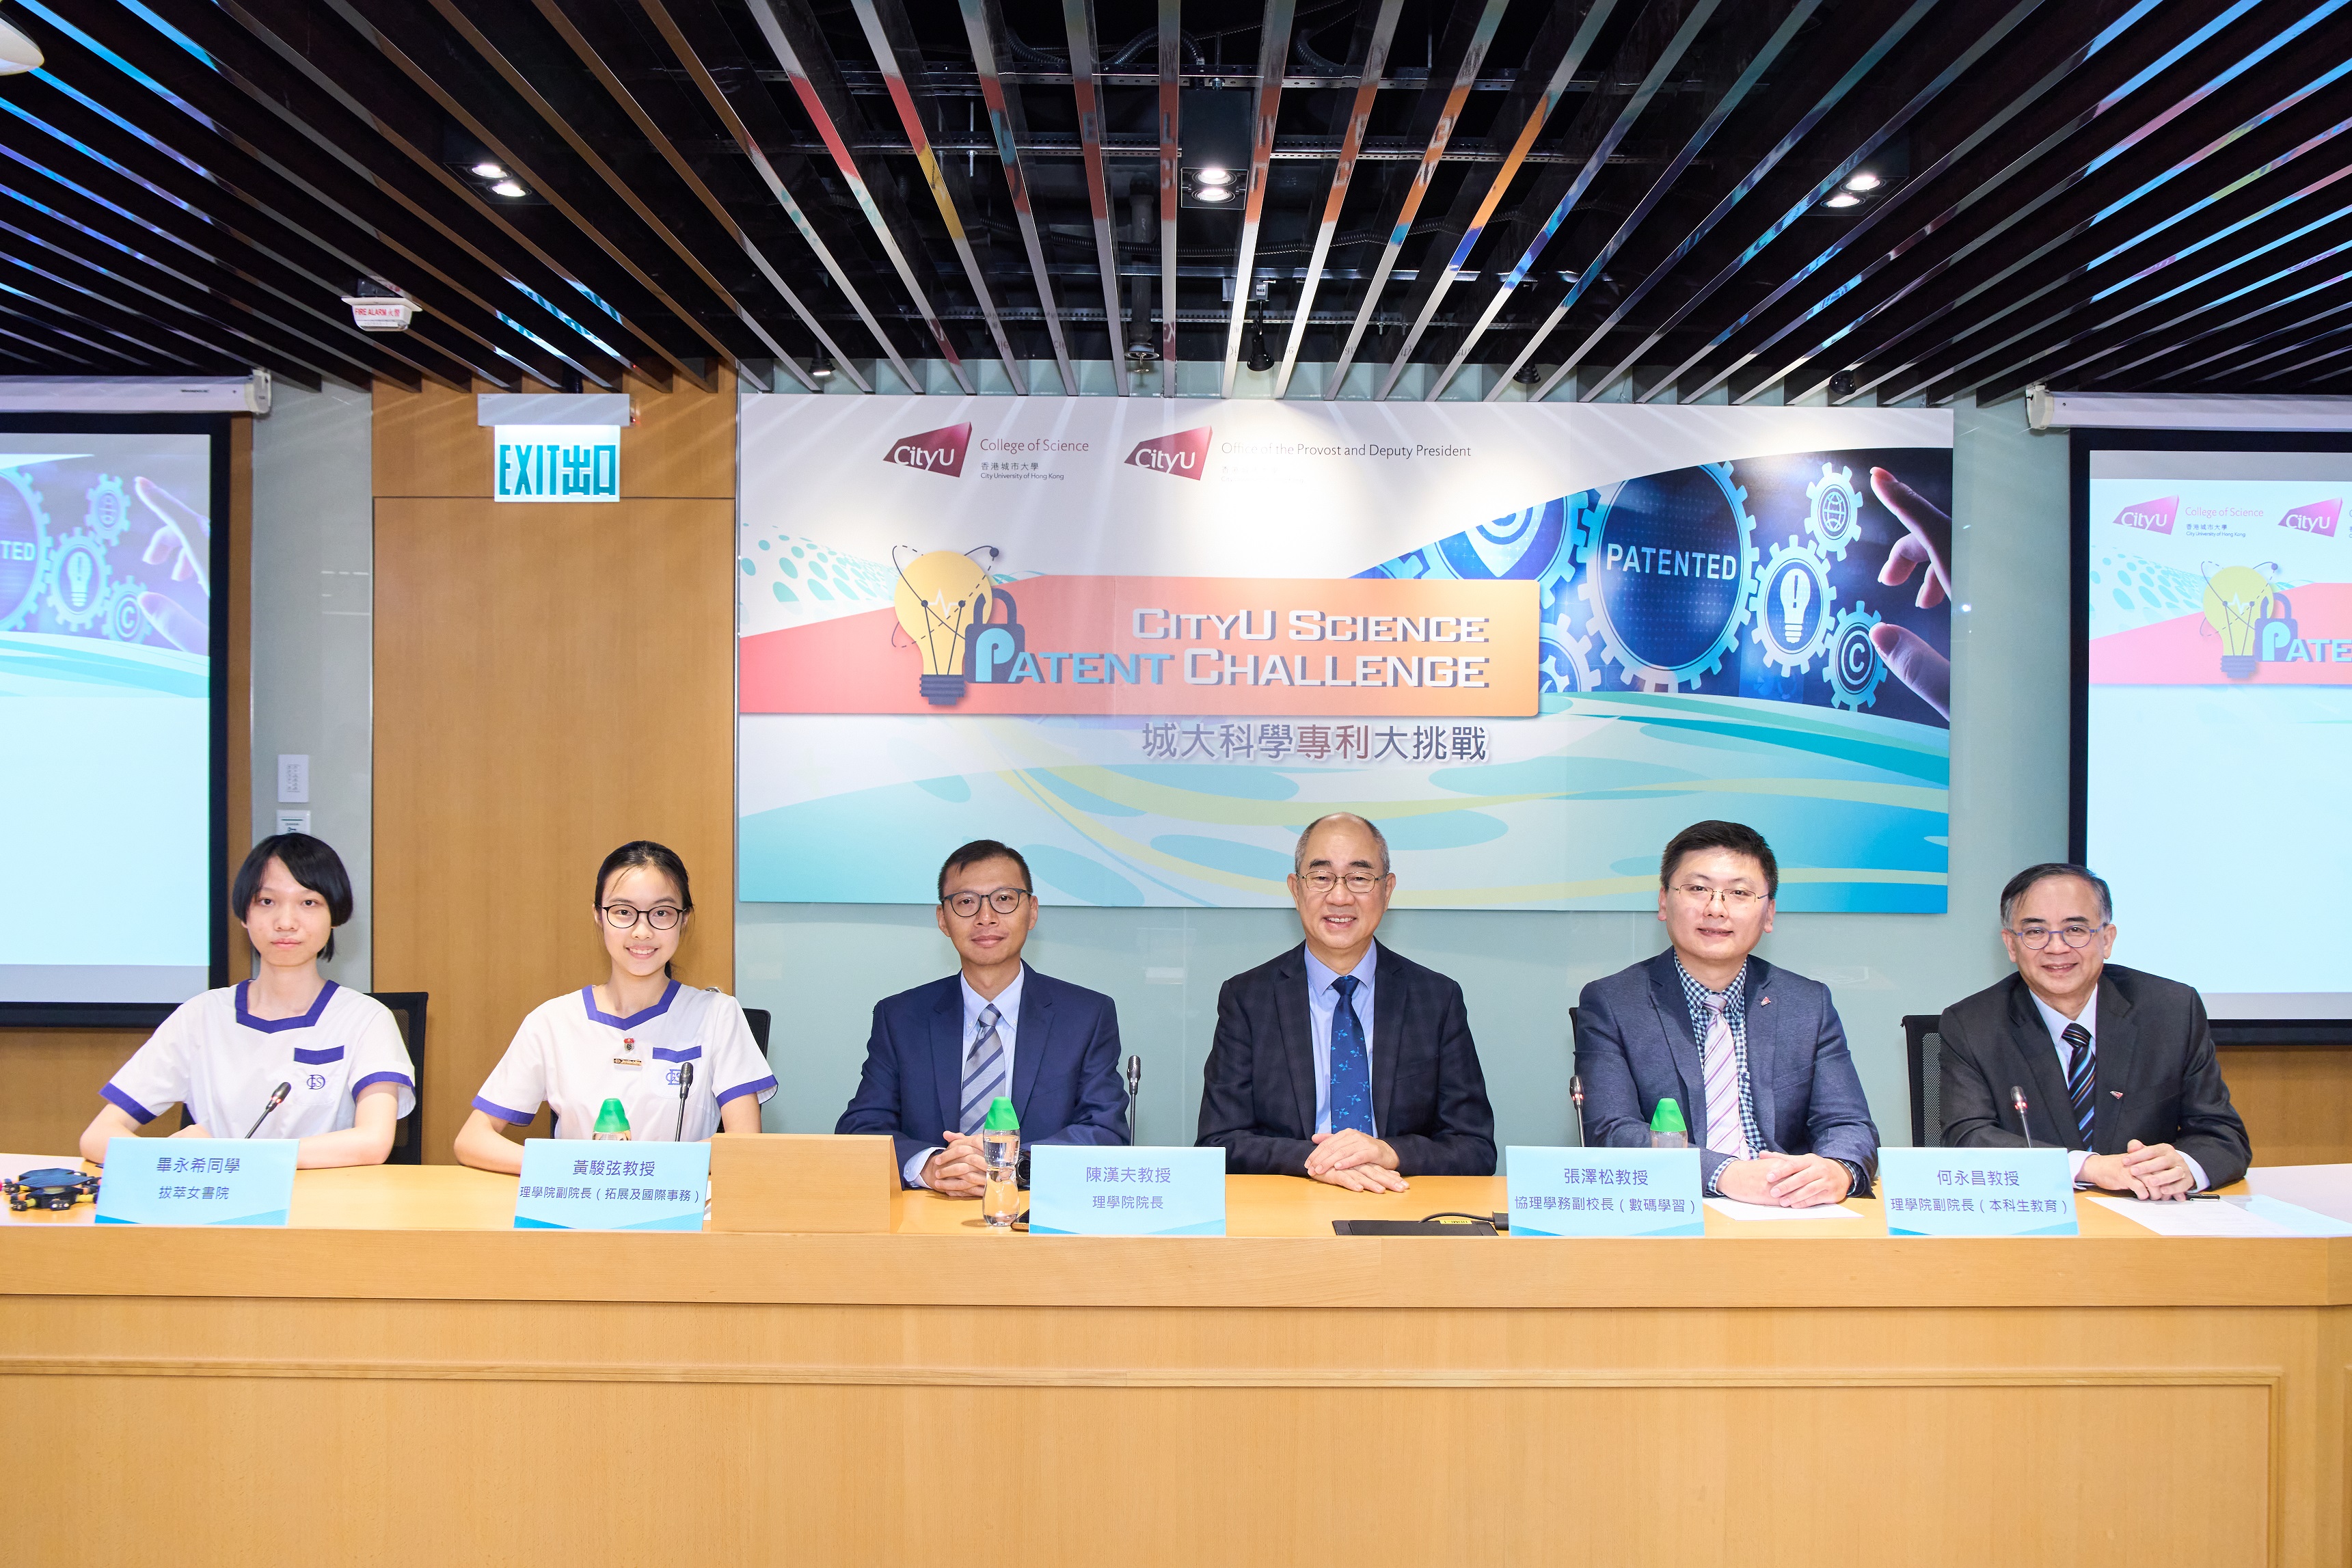 CityU Science Patent Challenge Press Conference